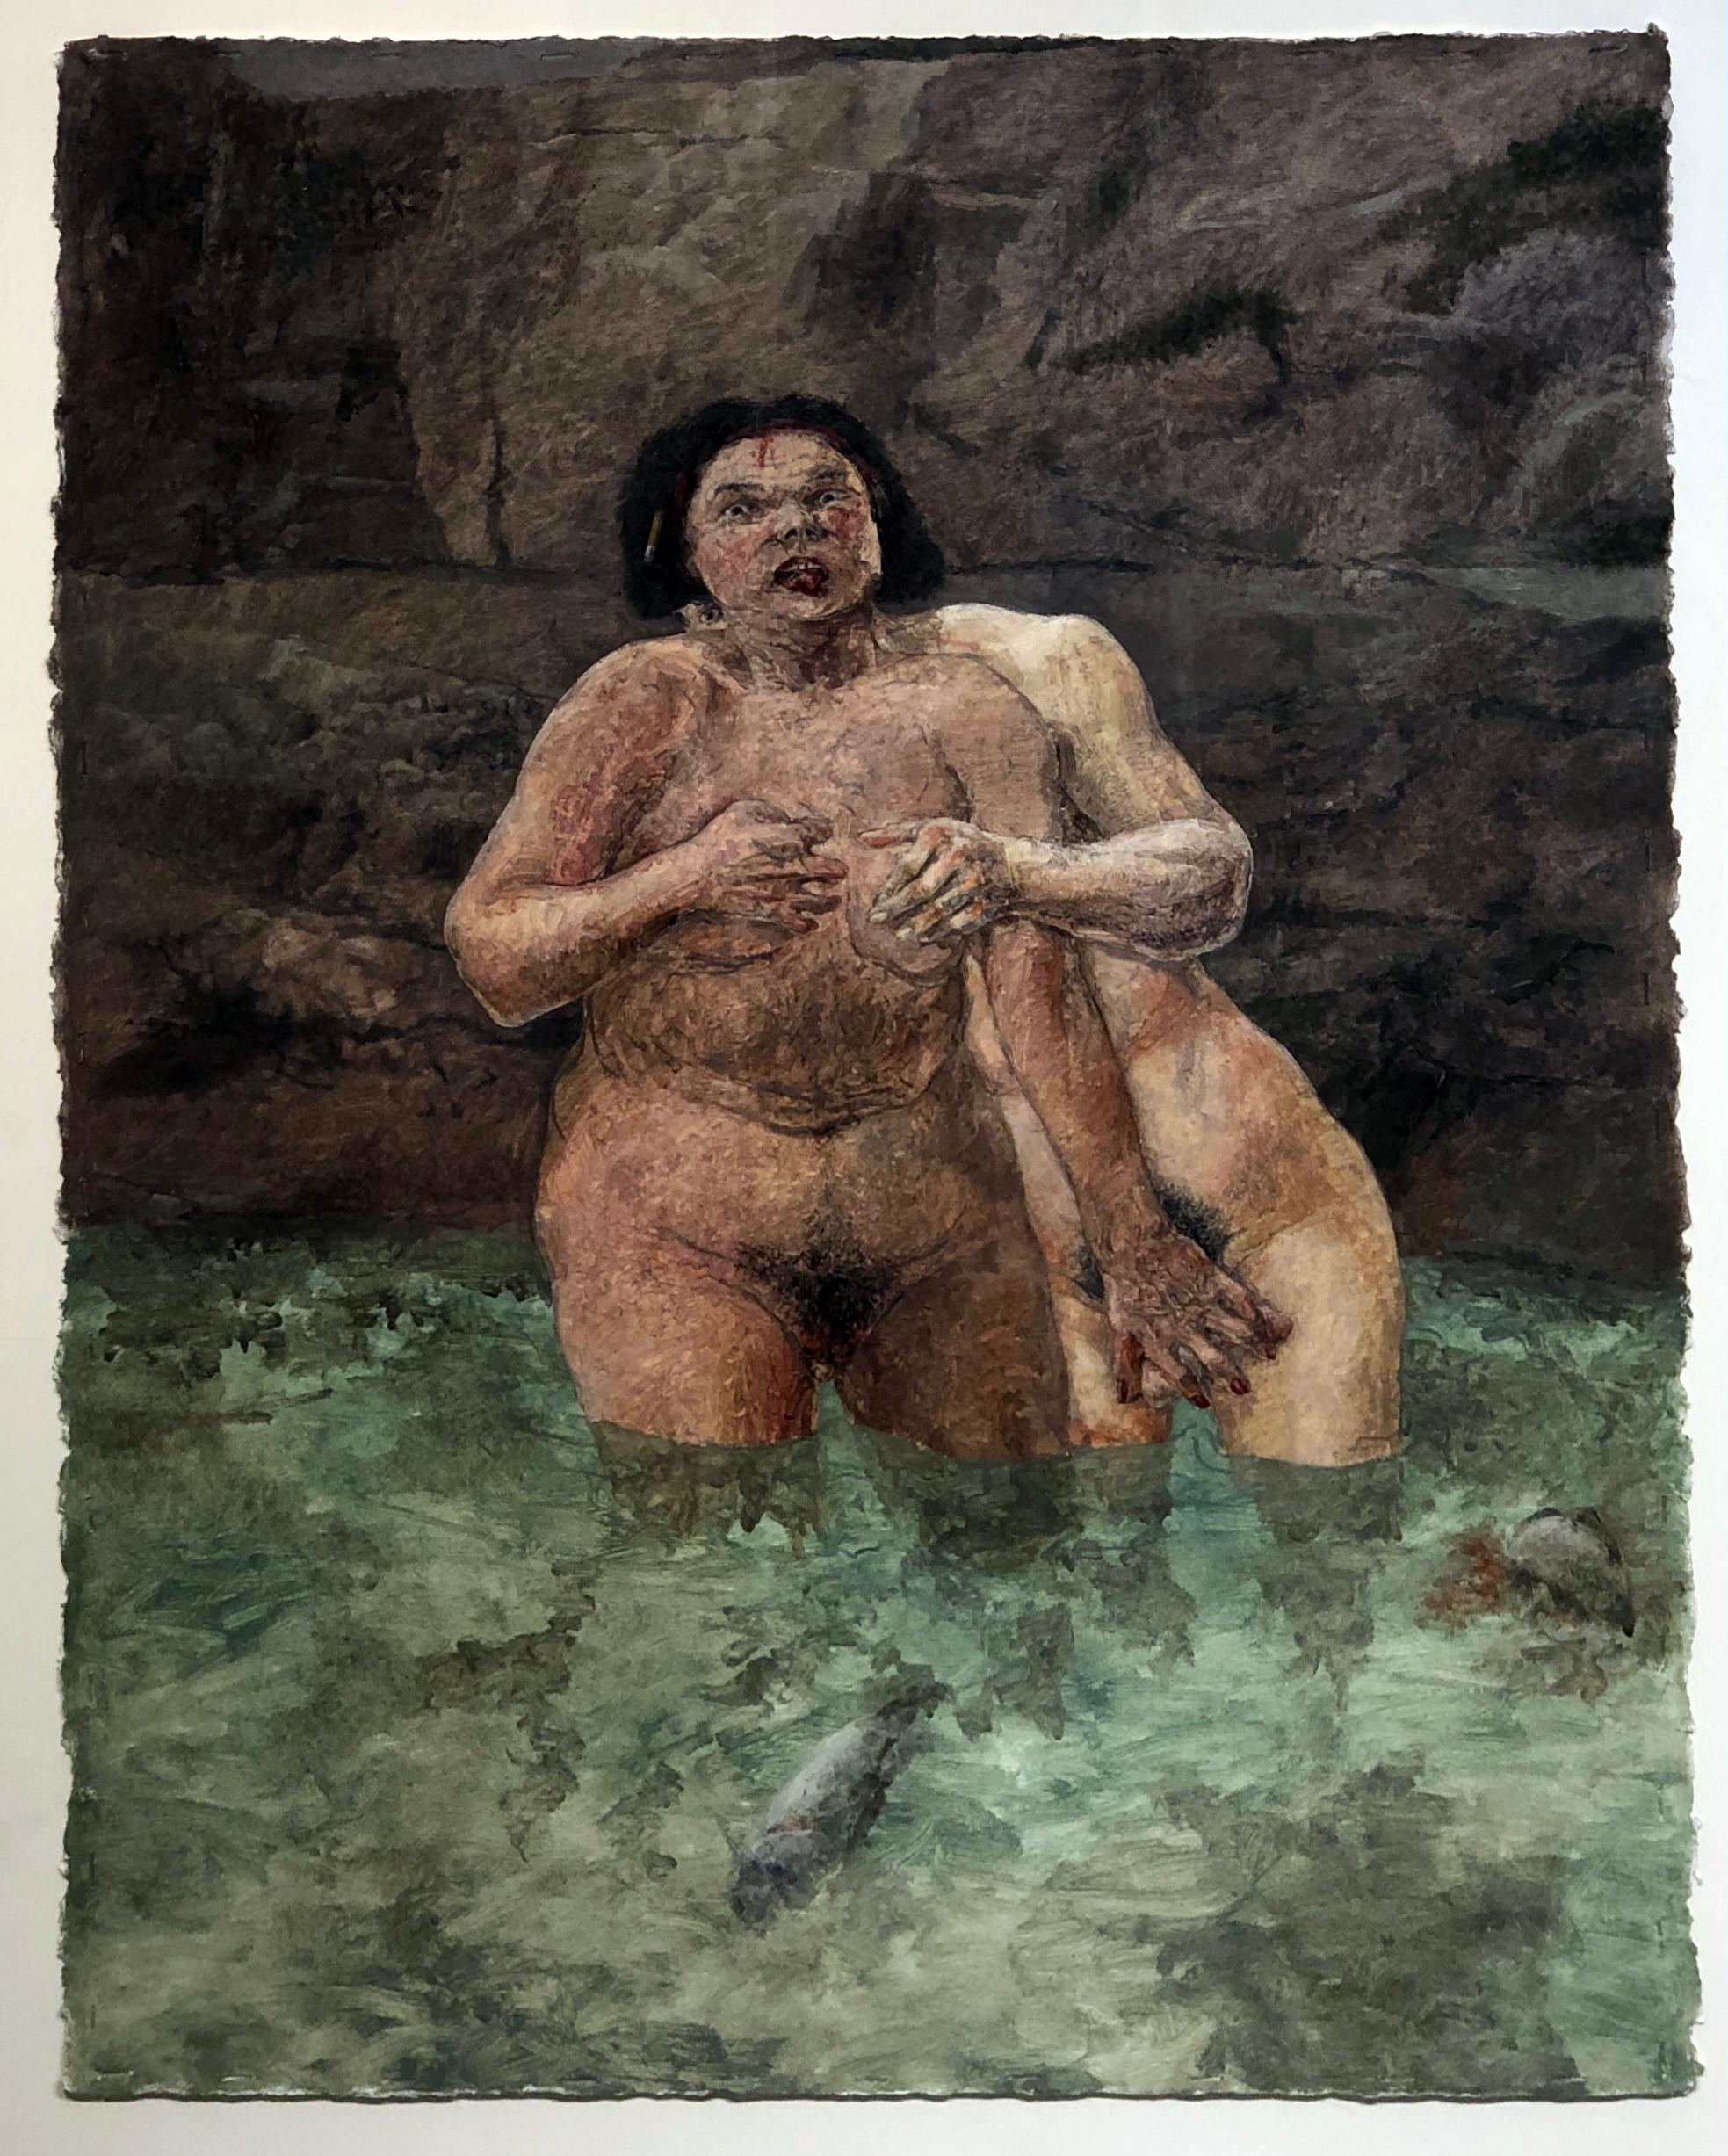 Lust, From the Seven Deadly Sins Series, Nude Figures, Oil on Watercolor Paper